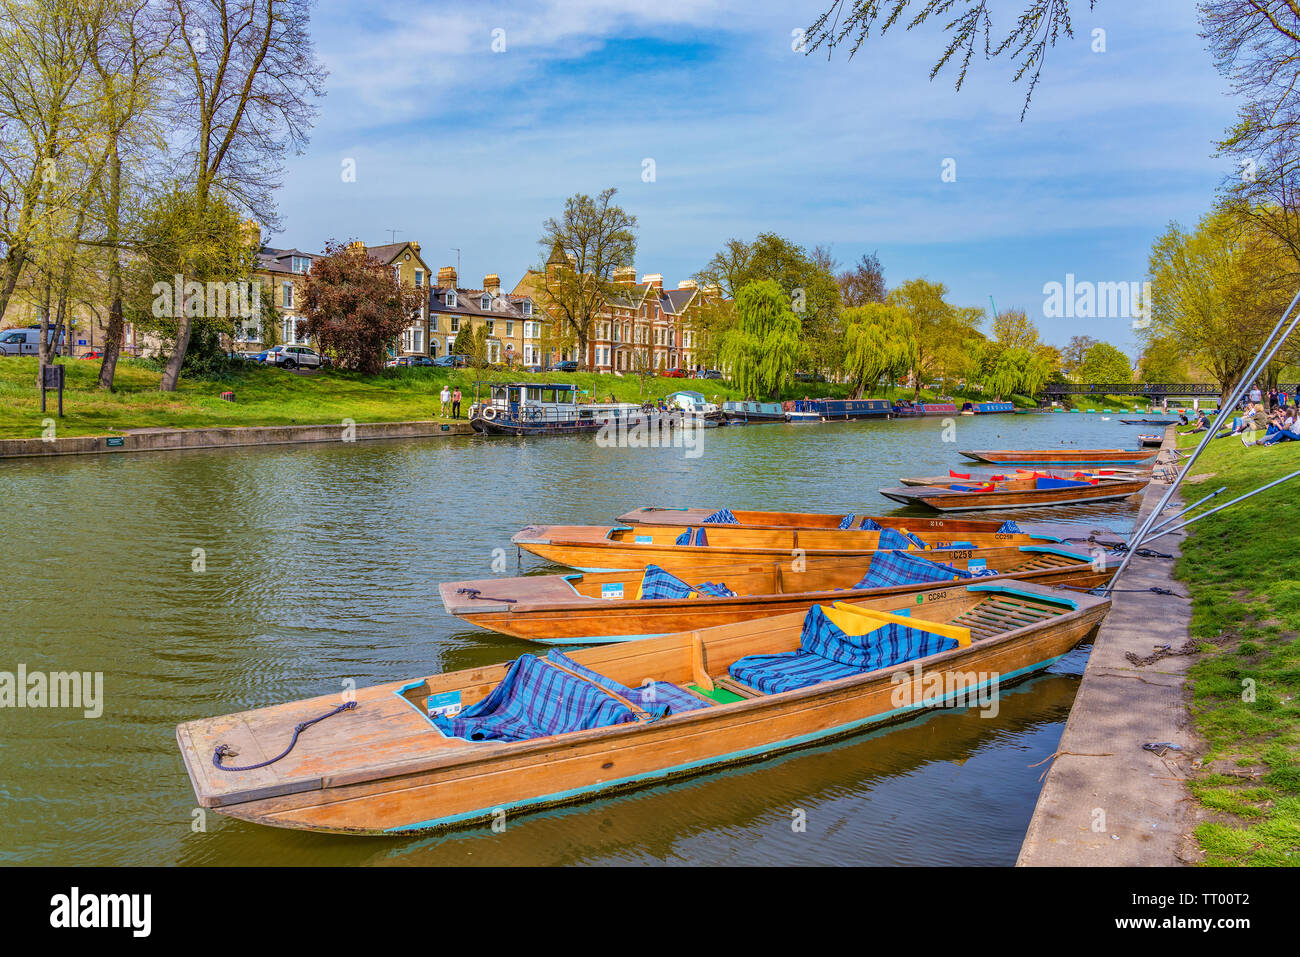 CAMBRIDGE, UNITED KINGDOM - APRIL 18: View of traditional punt boats which are used for river tours along the River Cam on April 18, 2019 in Cambridge Stock Photo